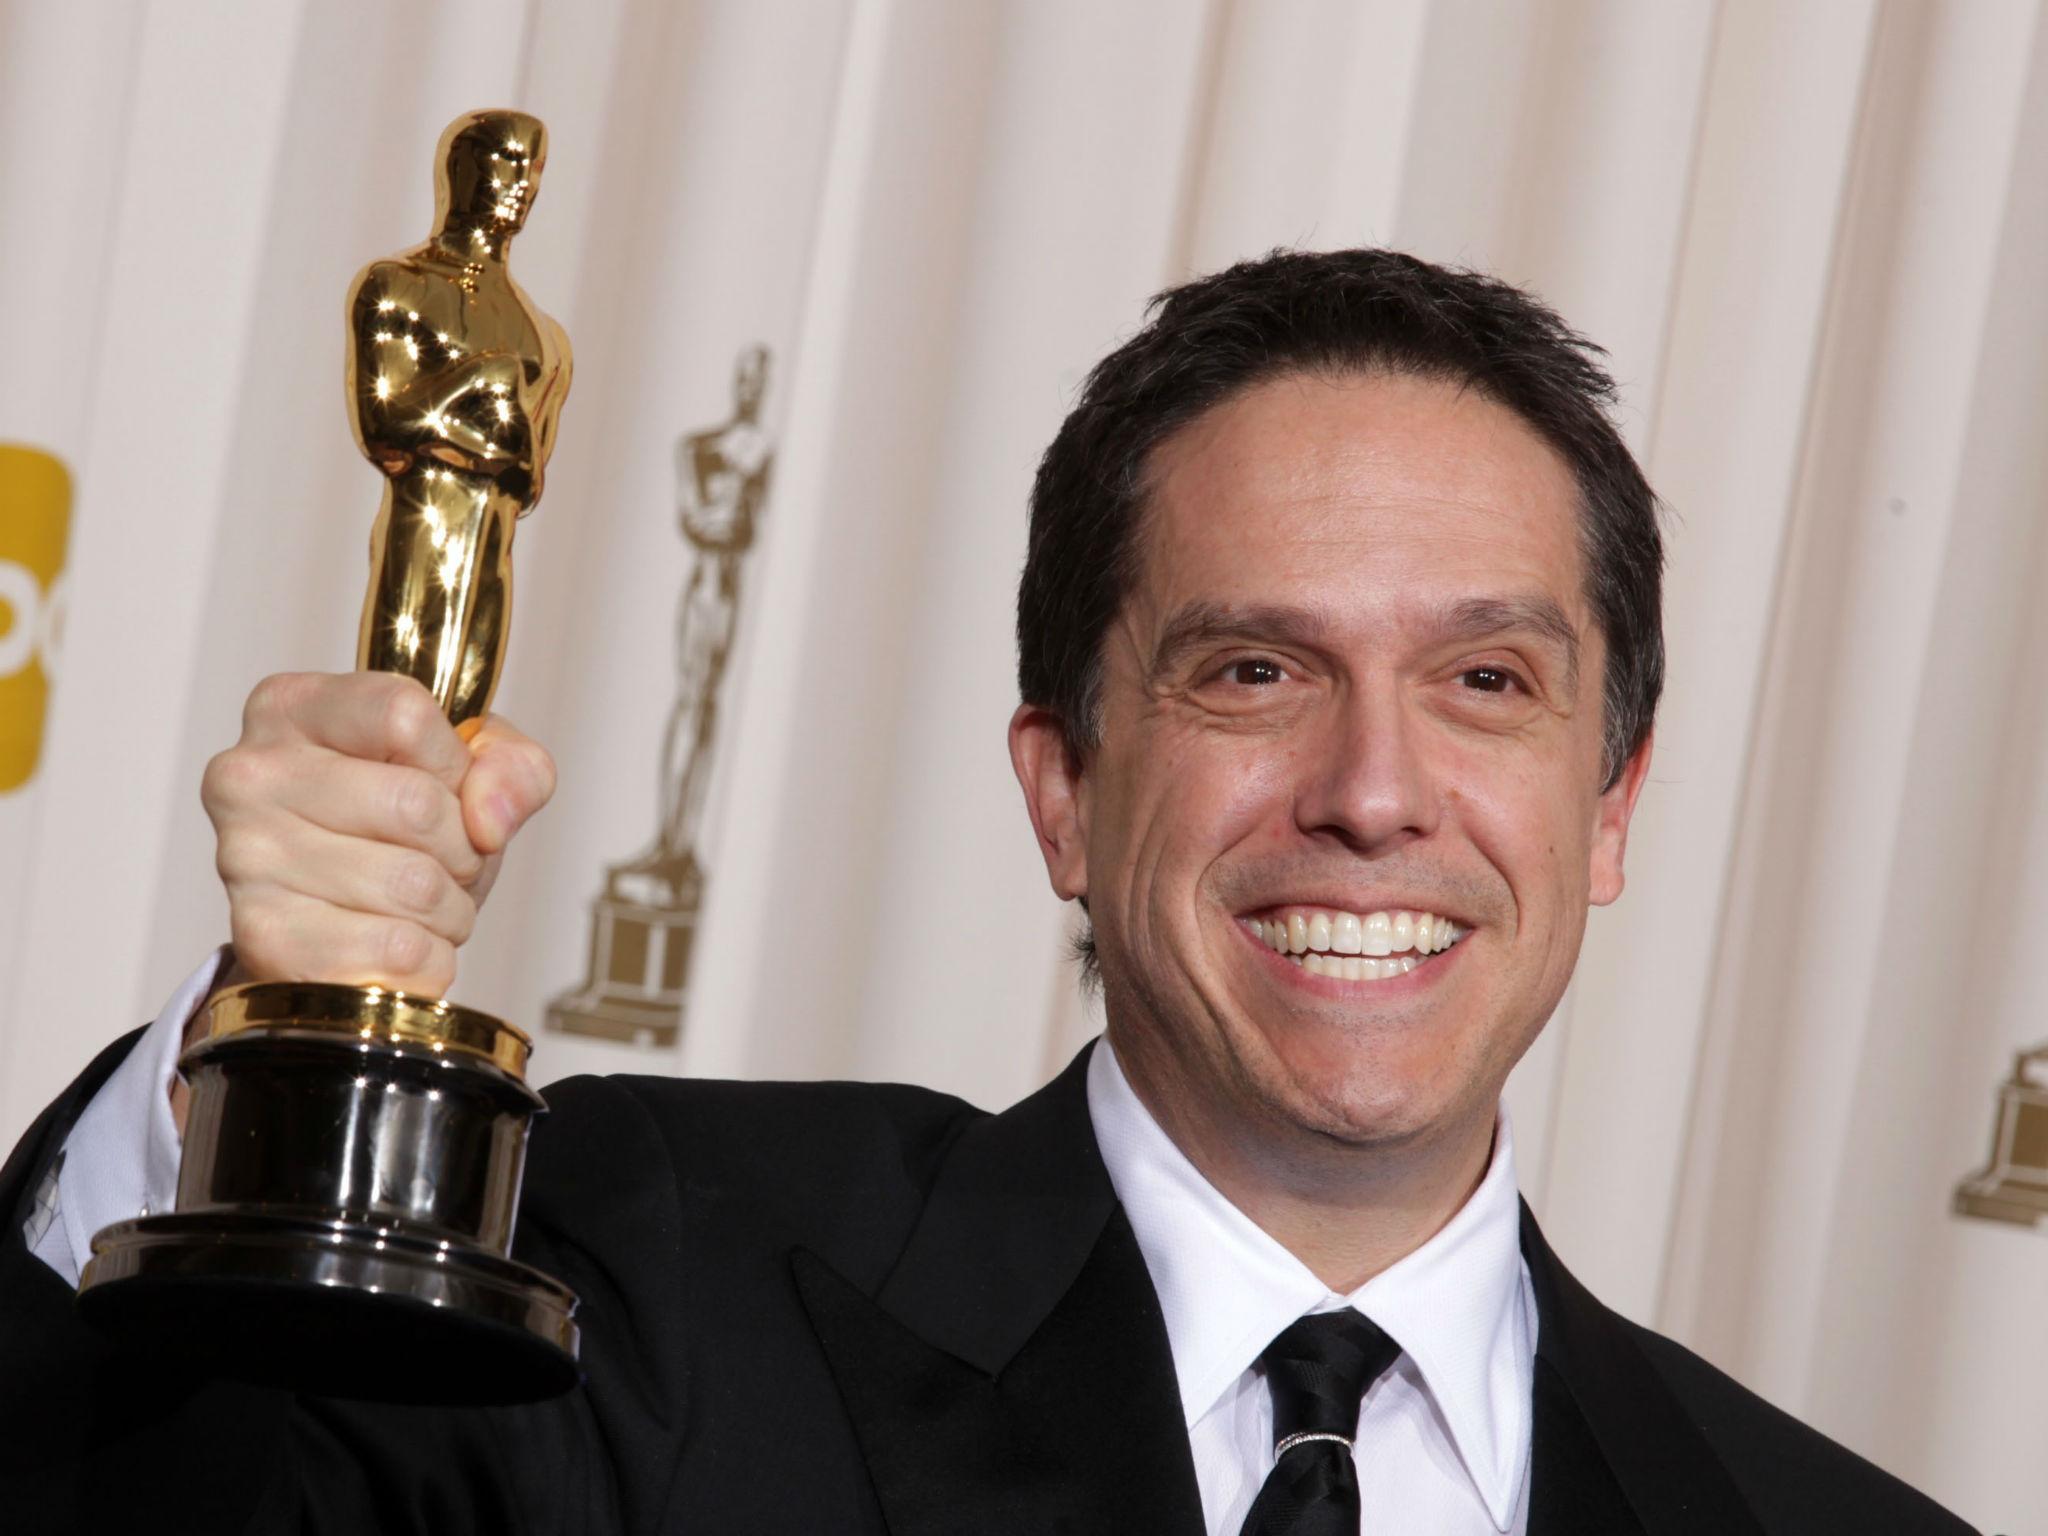 Lee Unkrich won an Oscar for ‘Toy Story 3’ in 2011